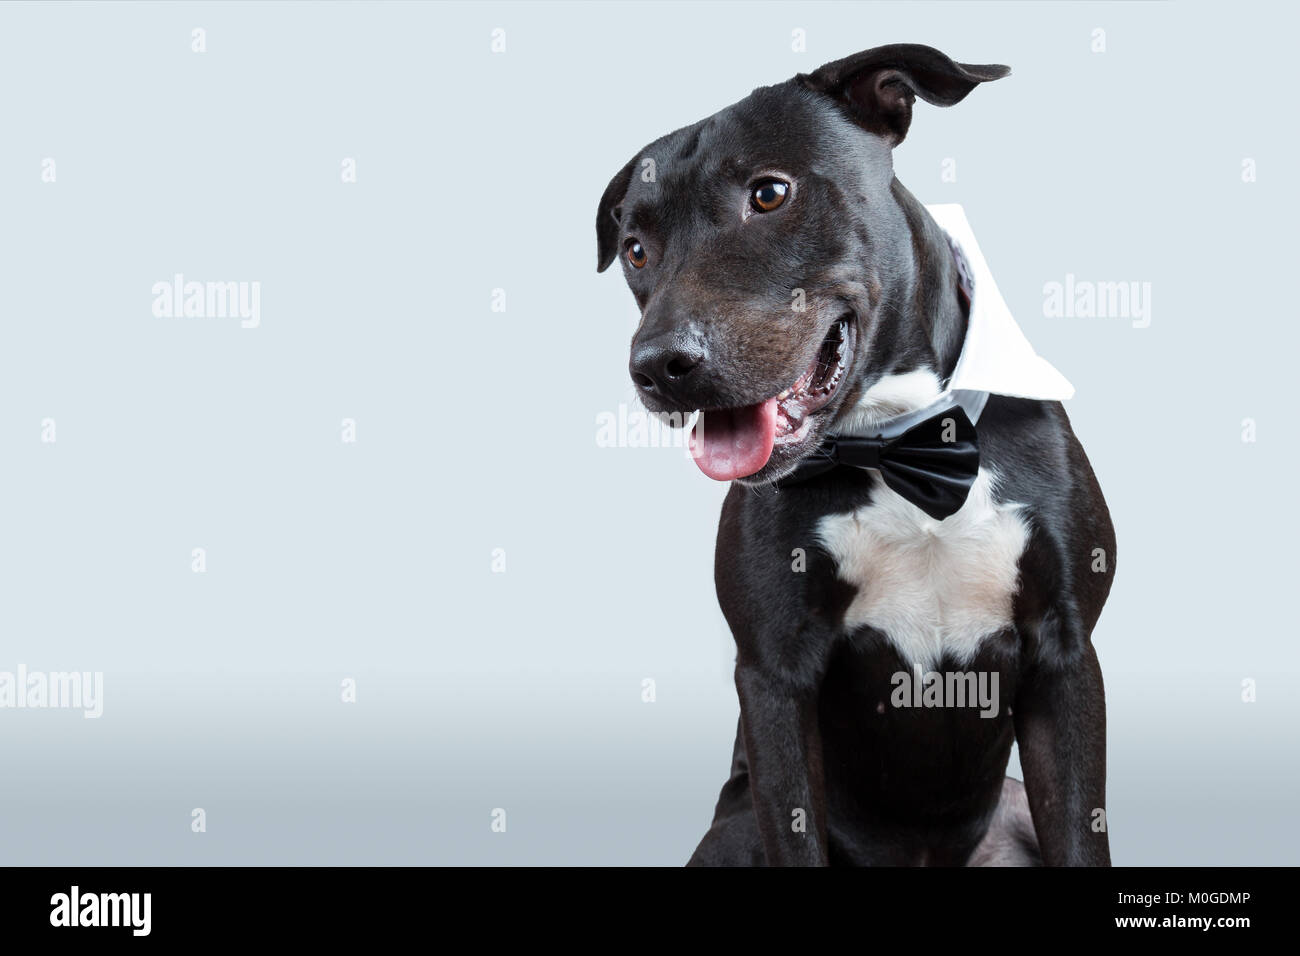 An american pitbull terrier wearing a bow tie collar in a ligth gray background looking sideways. Stock Photo